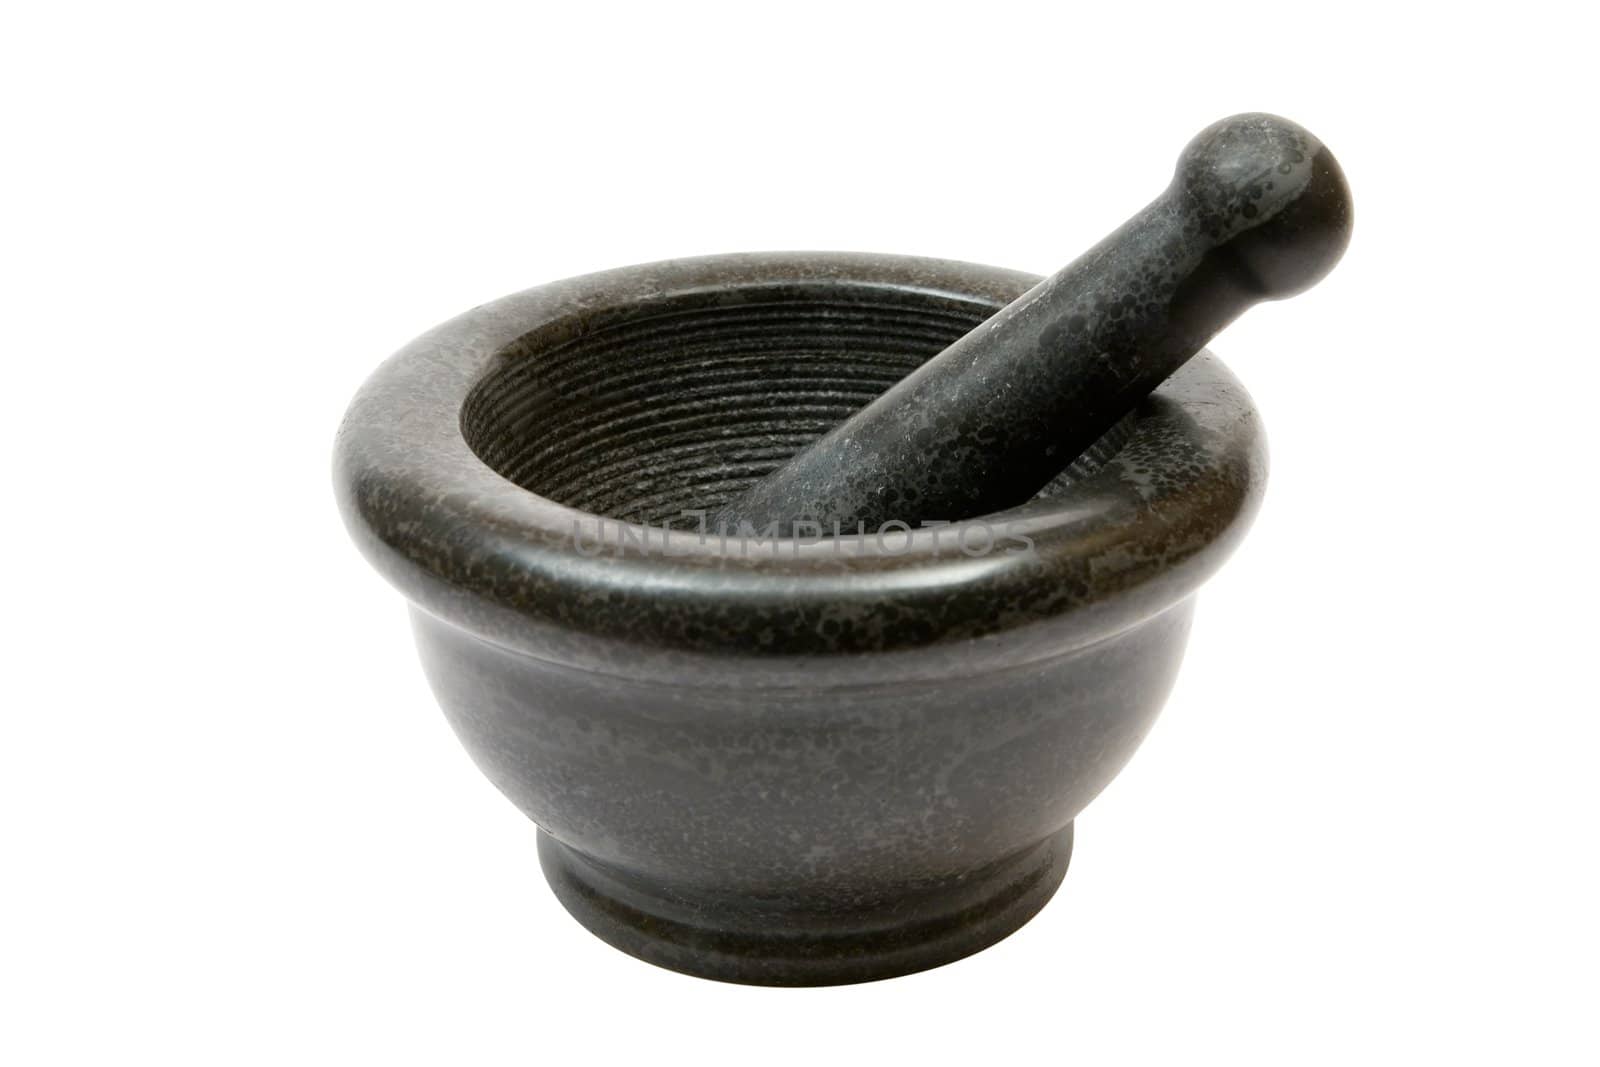 Mortar and pestle. Isolated on a white background.